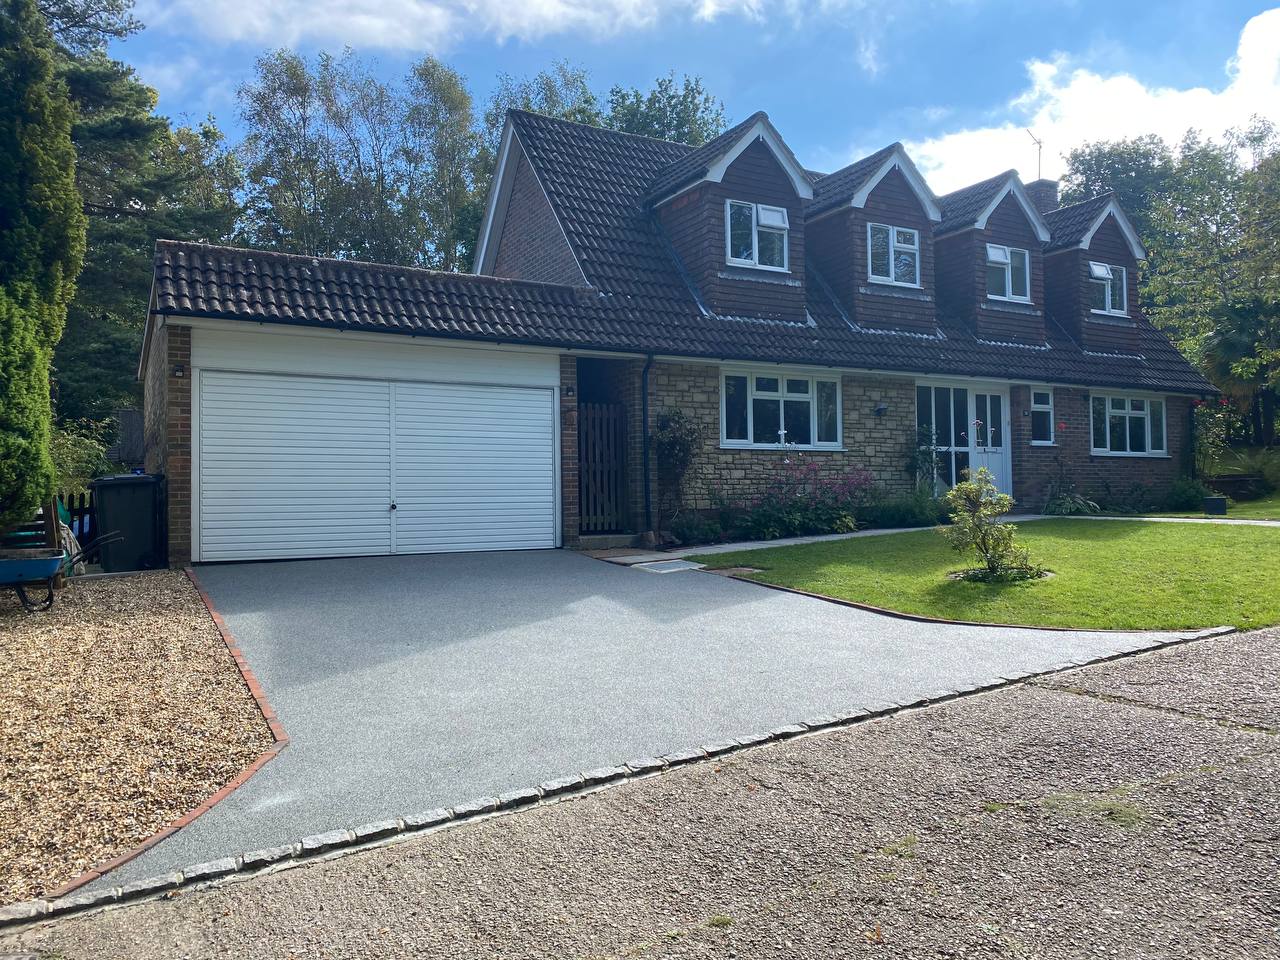 This is a photo of a recent installed resin driveway. the work was carried out by Resin Driveways Newcastle